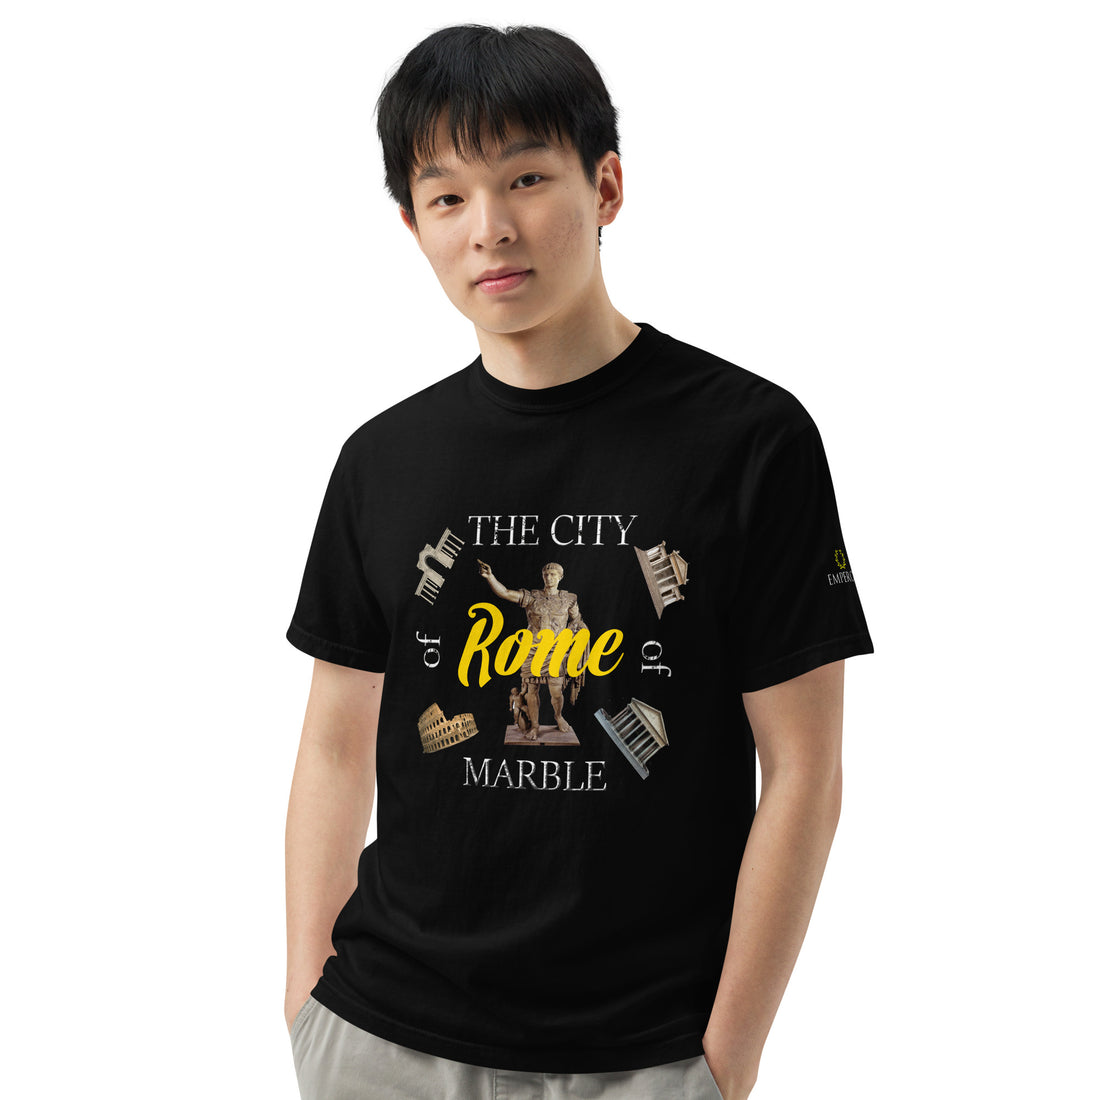 The City of Marble - Rome Architecture T-Shirt